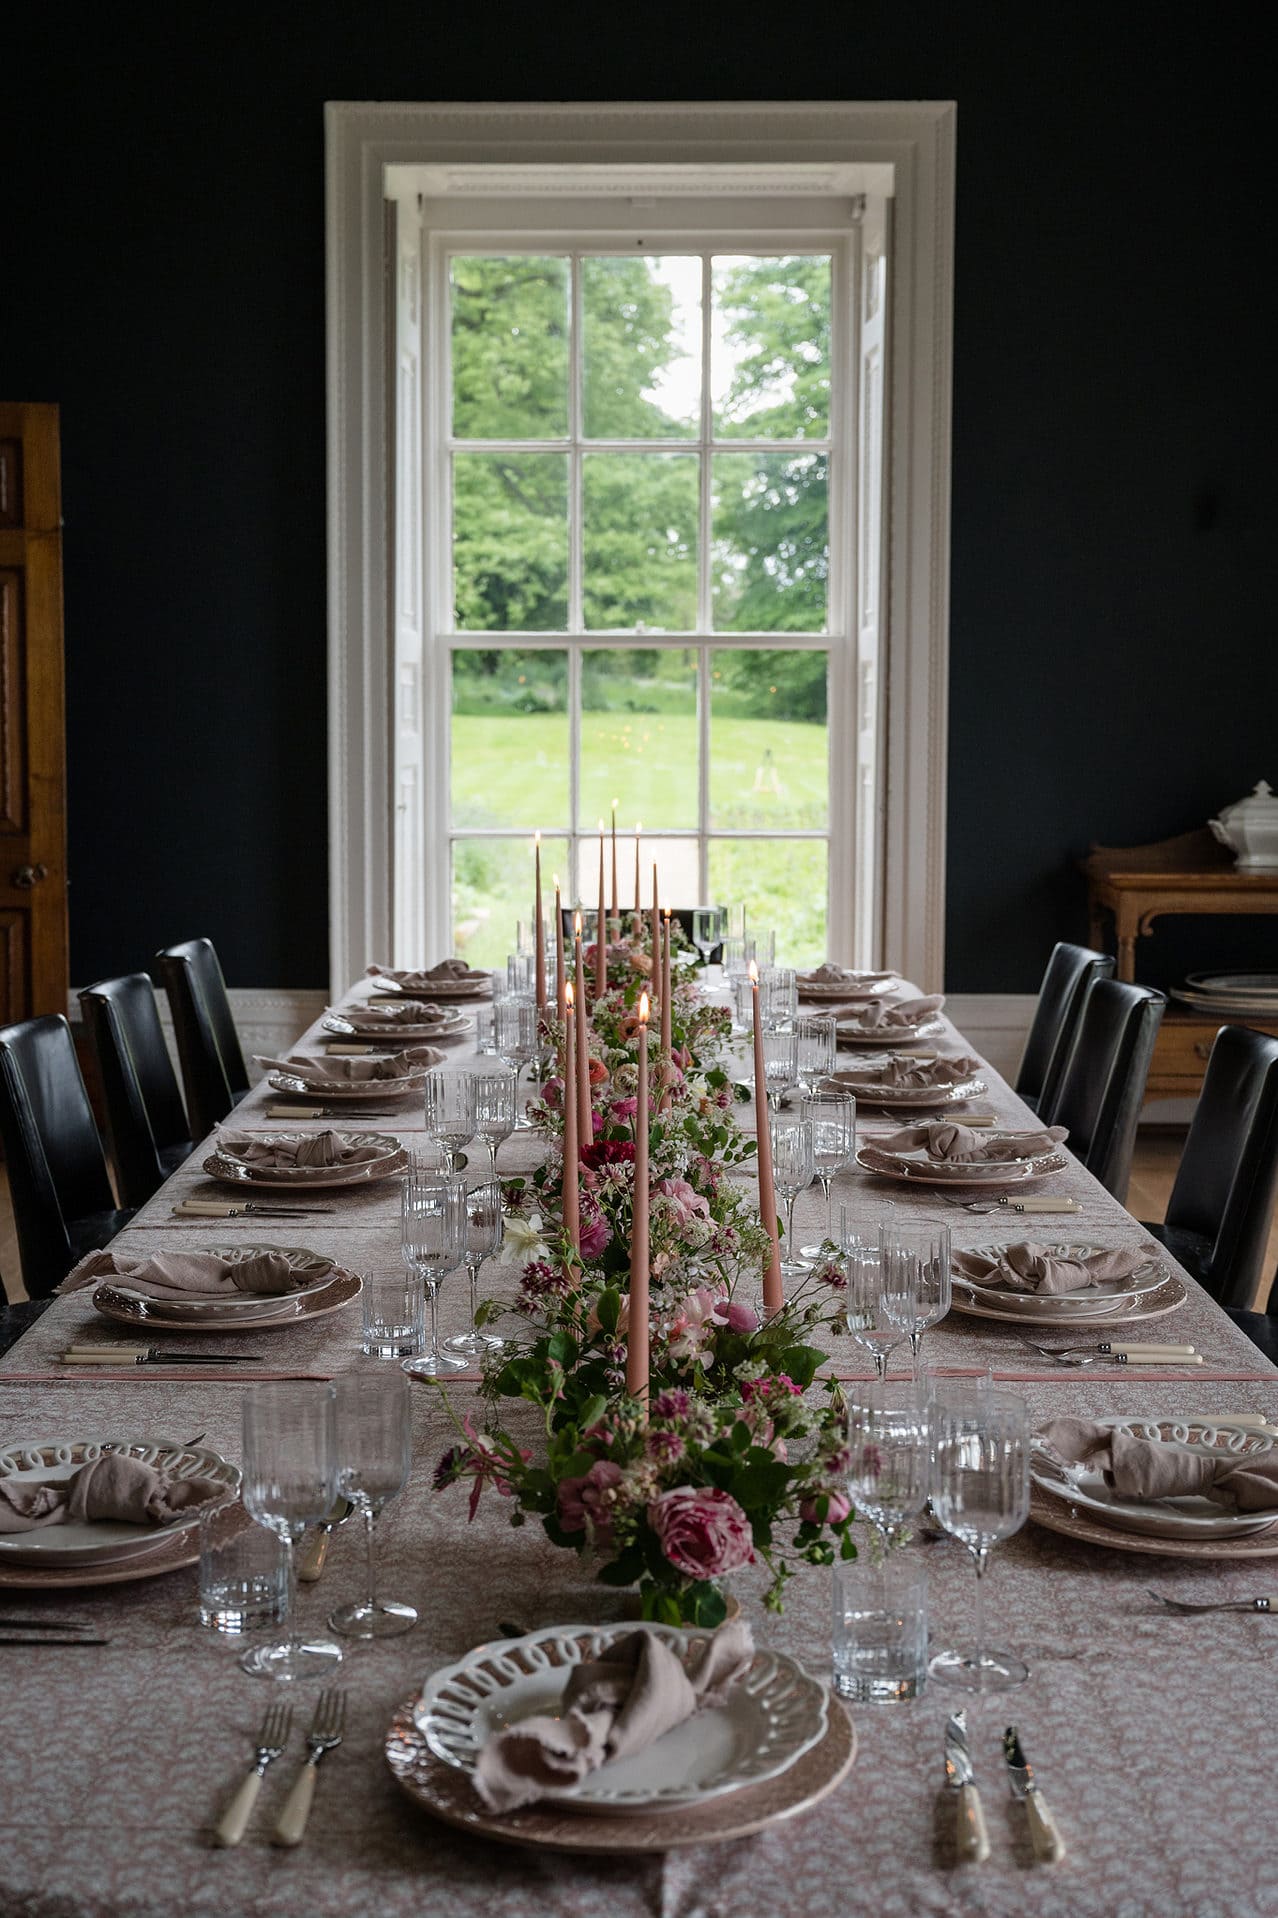 A long banqueting table set for dinner with pink flowers and tableware in a dining room with navy painted walls